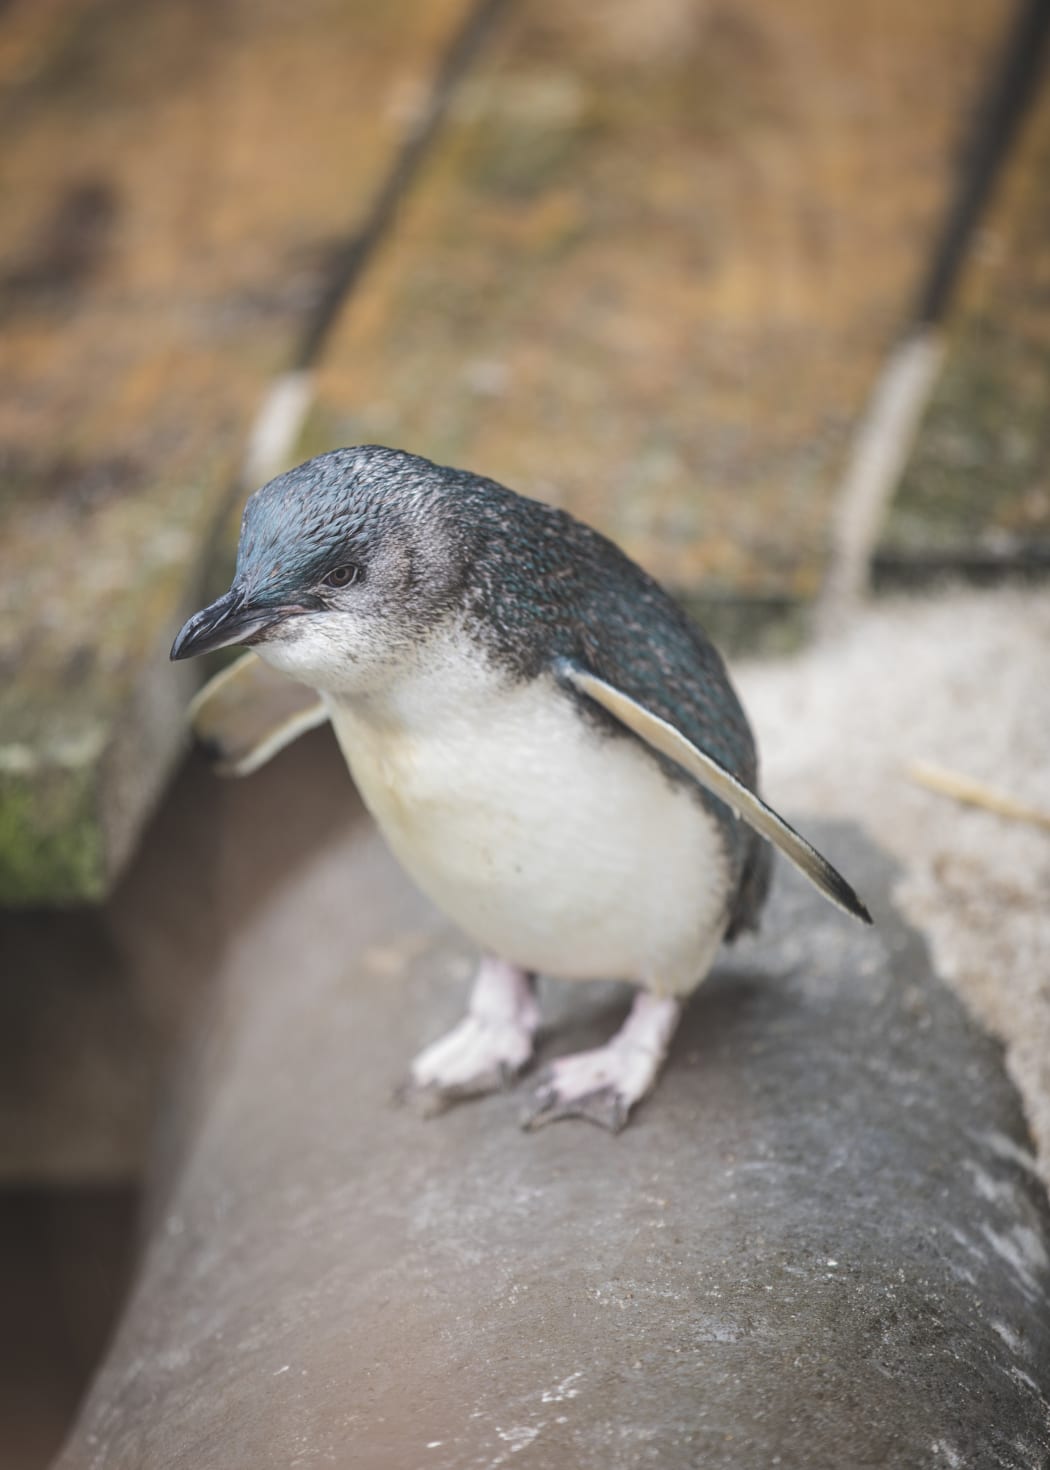 Little blue penguin Draco is this year's Penguin of the Year.